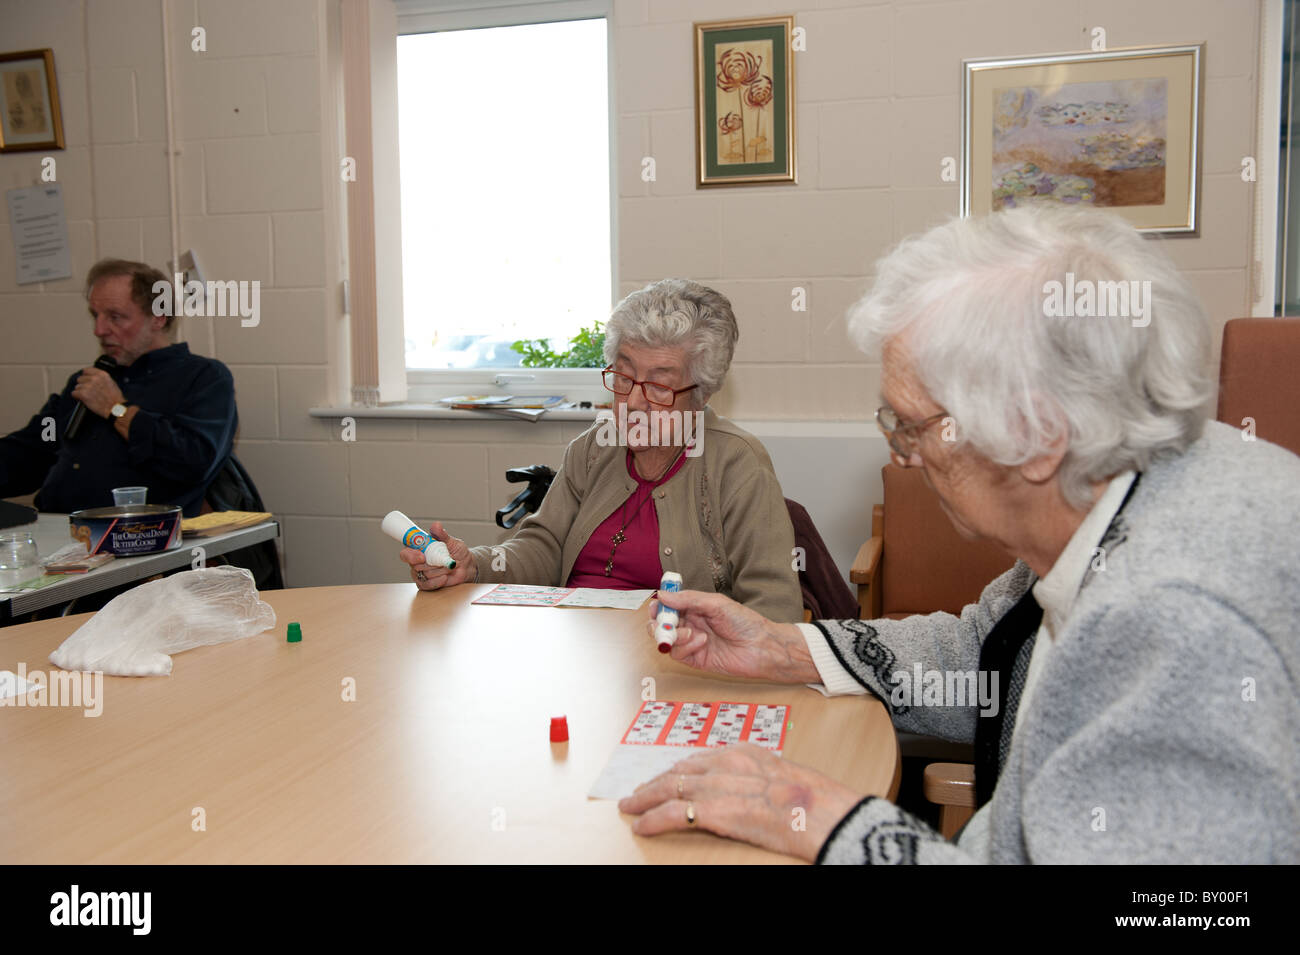 Two elderly ladies sitting at table in council run day centre playing bingo. Bingo caller visible in the background. Stock Photo